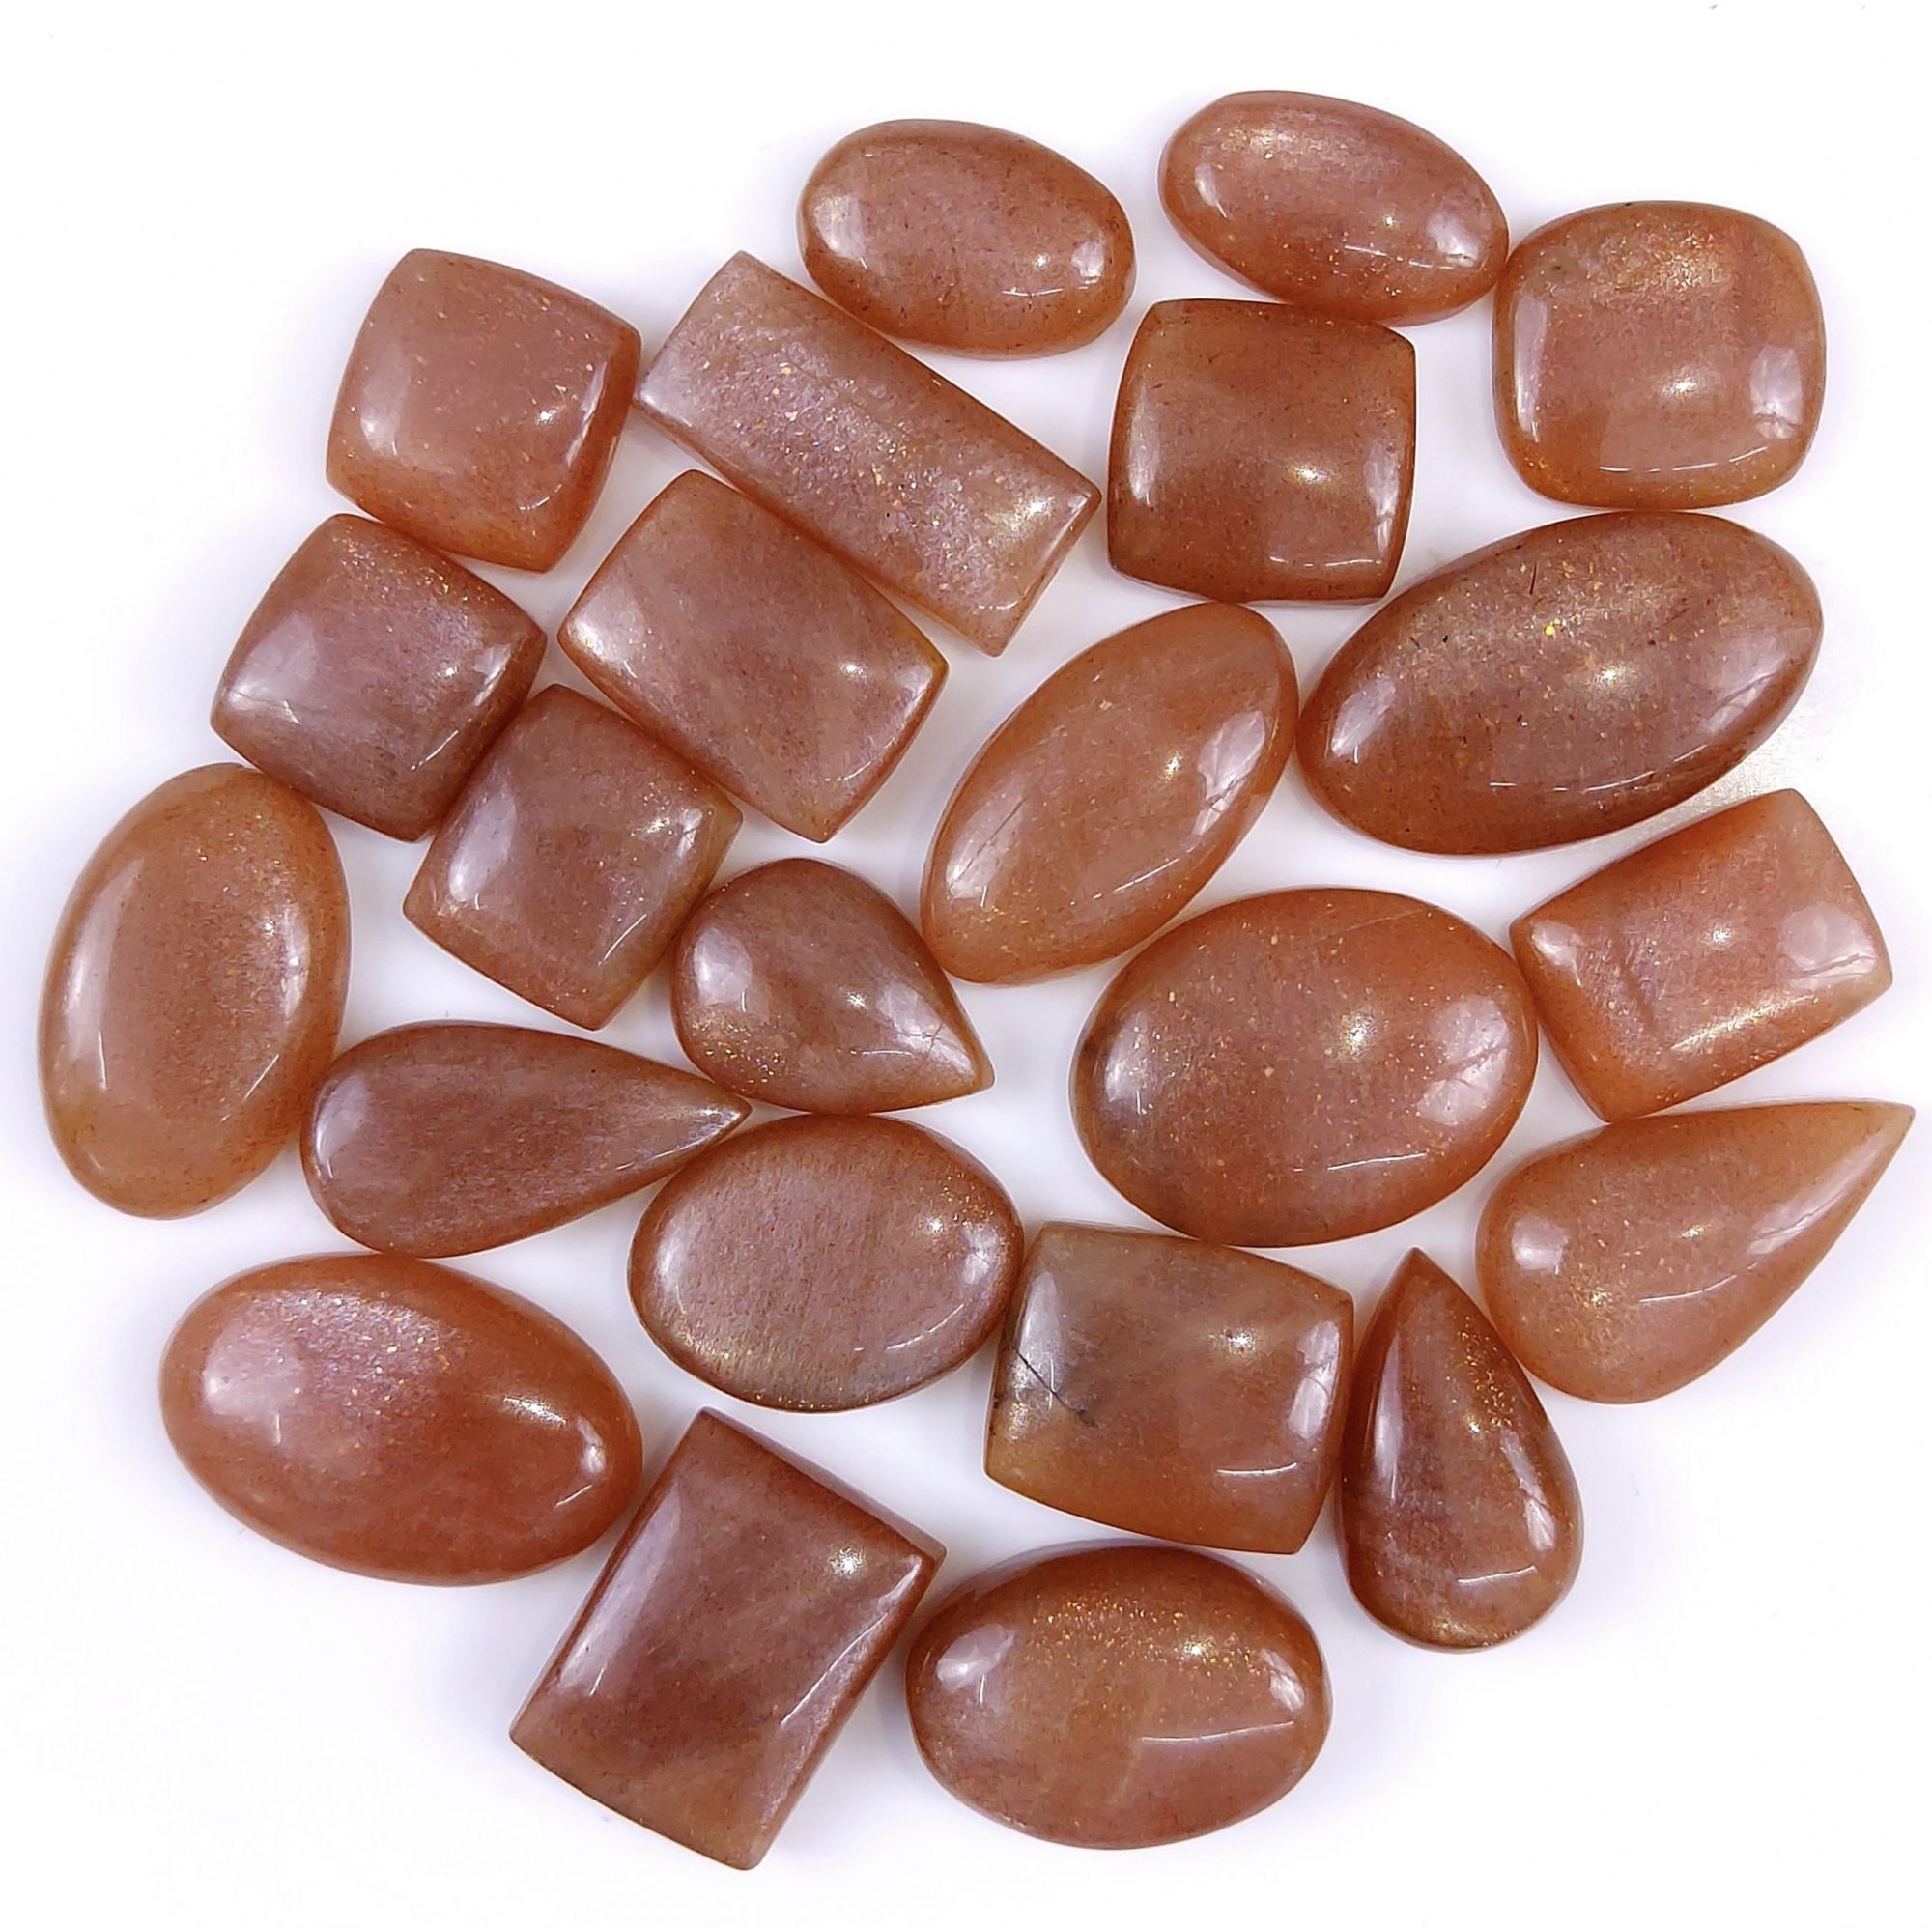 23Pcs 328Cts Natural Peach Moonstone Cabochon lot Gemstone Crystal Mix Shape Loose Gemstone beads for jewelry Making 28x18 15x15mm#7531